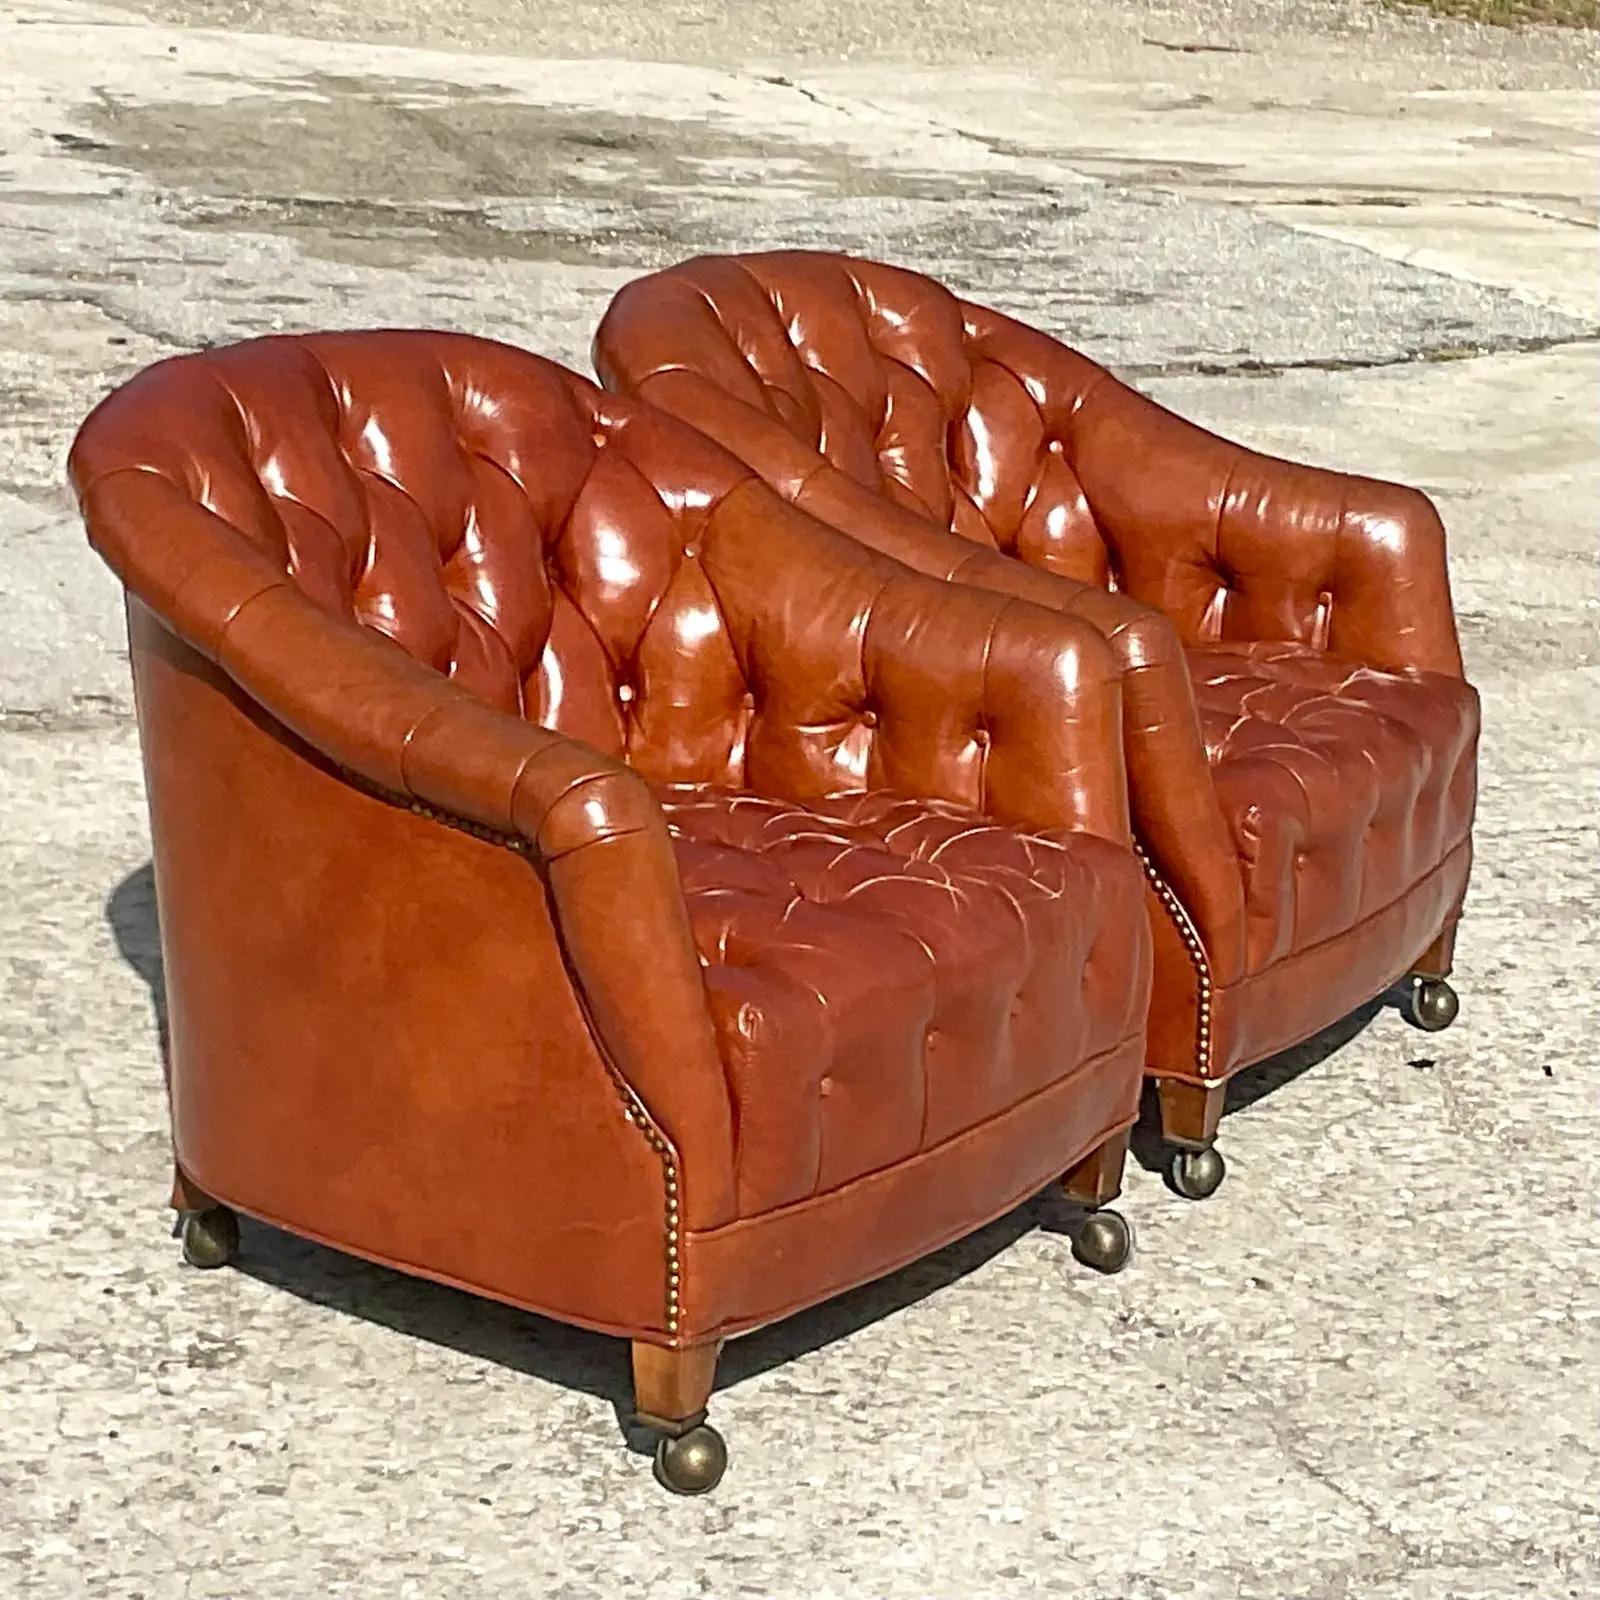 Vintage Regency Hickory Chair Tufted Leather Tub Chair on Casters, a Pair 2